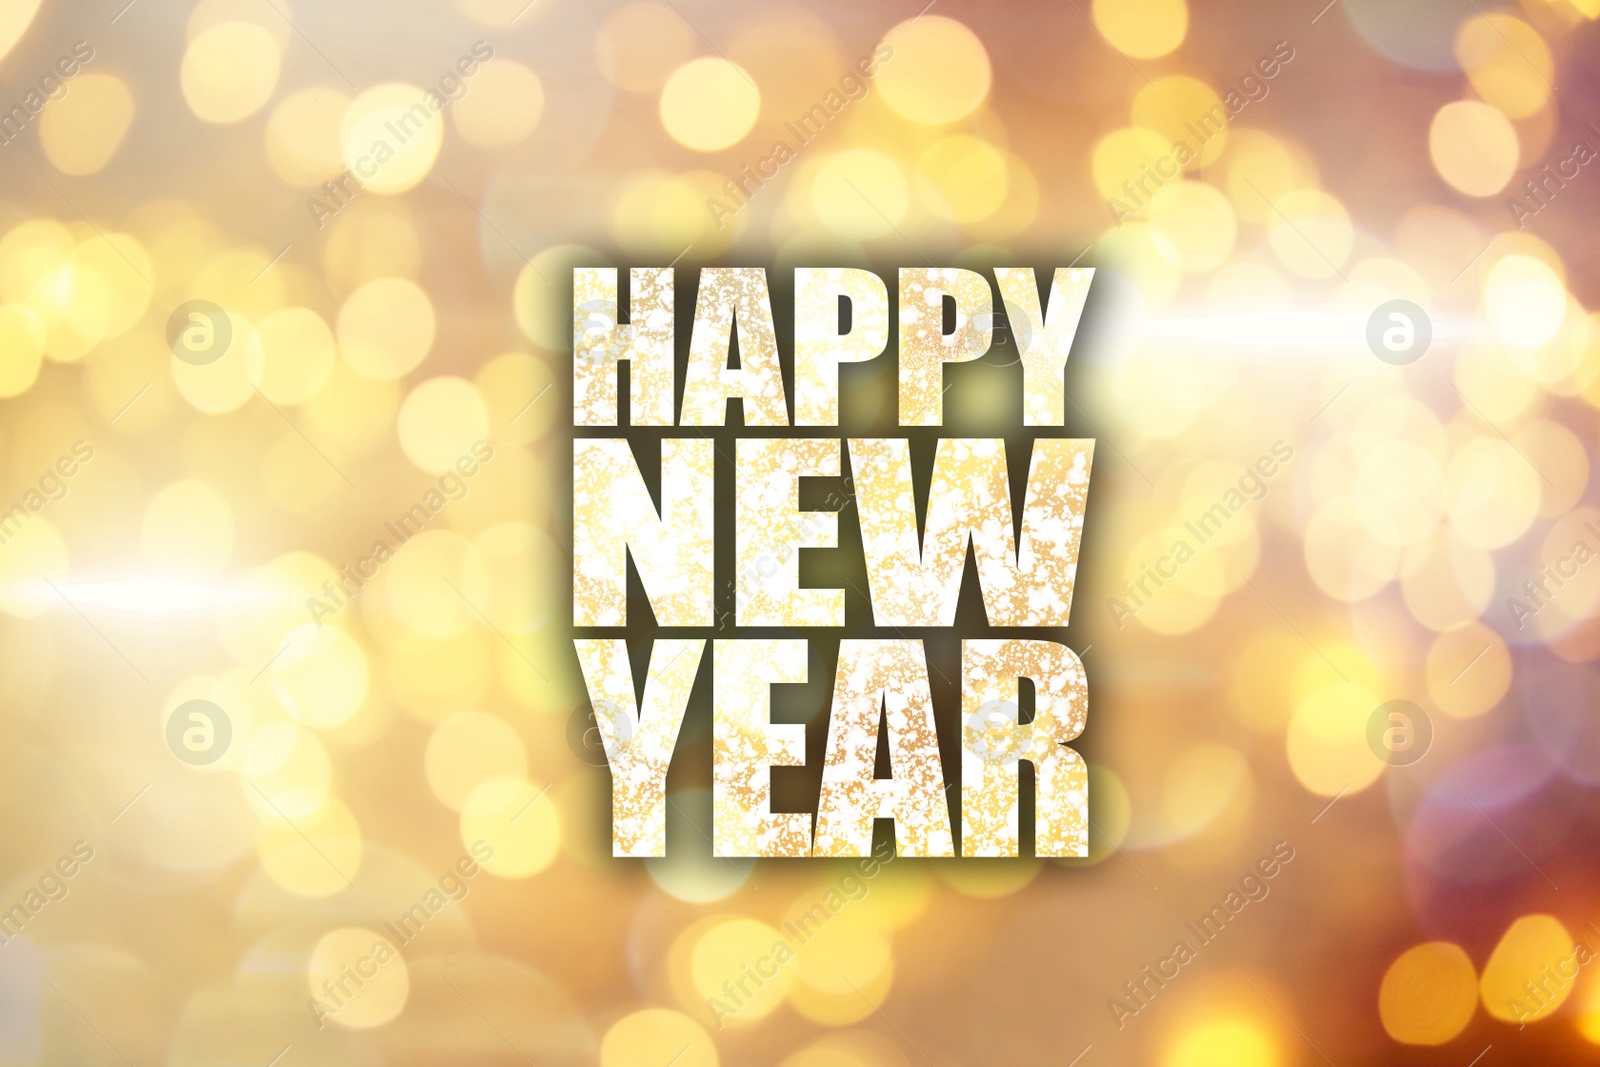 Illustration of Text Happy New Year on festive background with blurred lights, bokeh effect